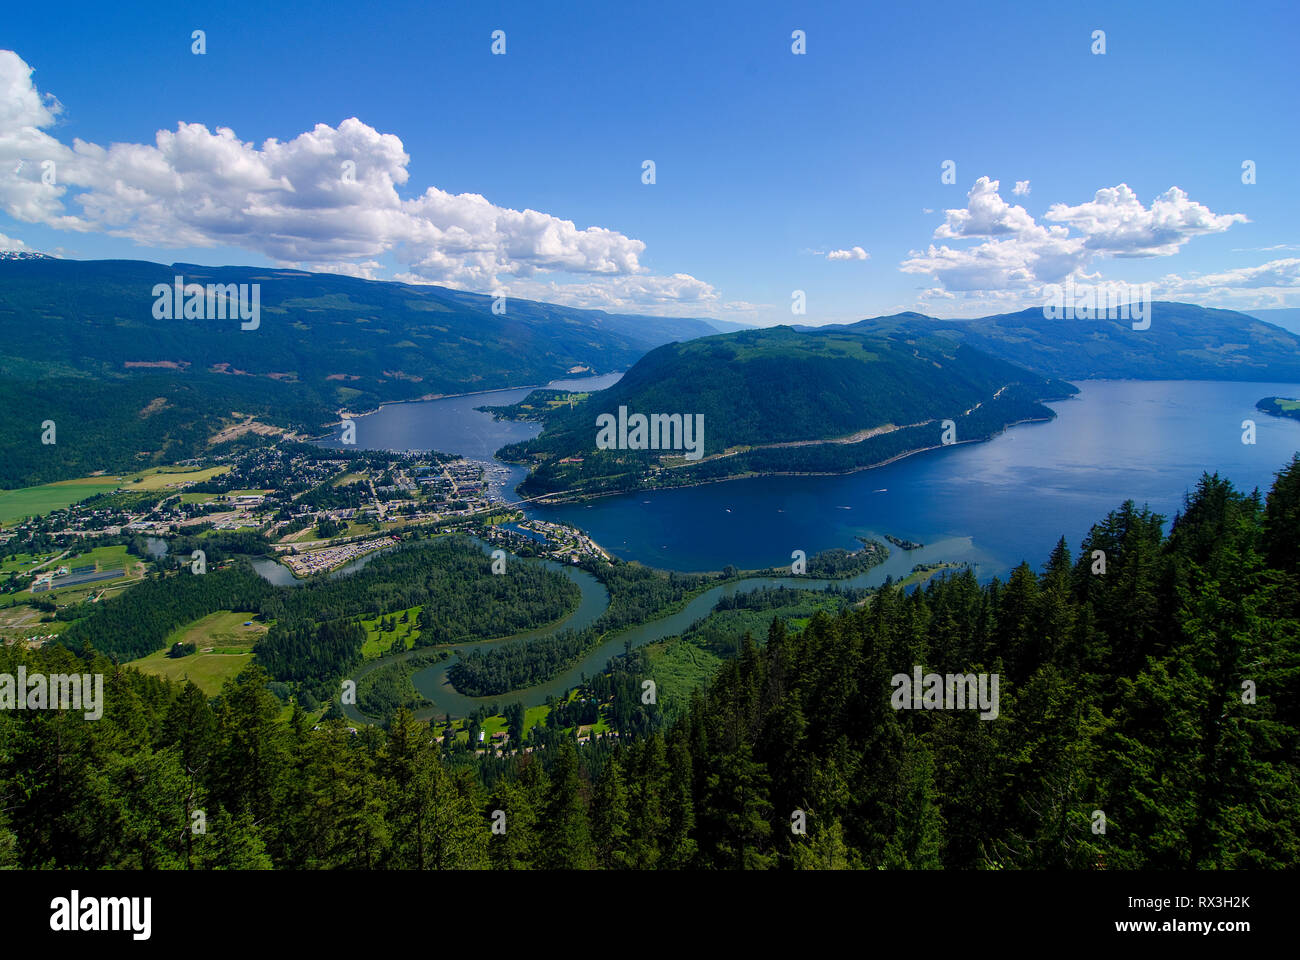 Extraordinary summer viewscape from the glider ramp overlooking Sicamous, the Eagle River and Shuswap Lake in British Columbia, Canada Stock Photo